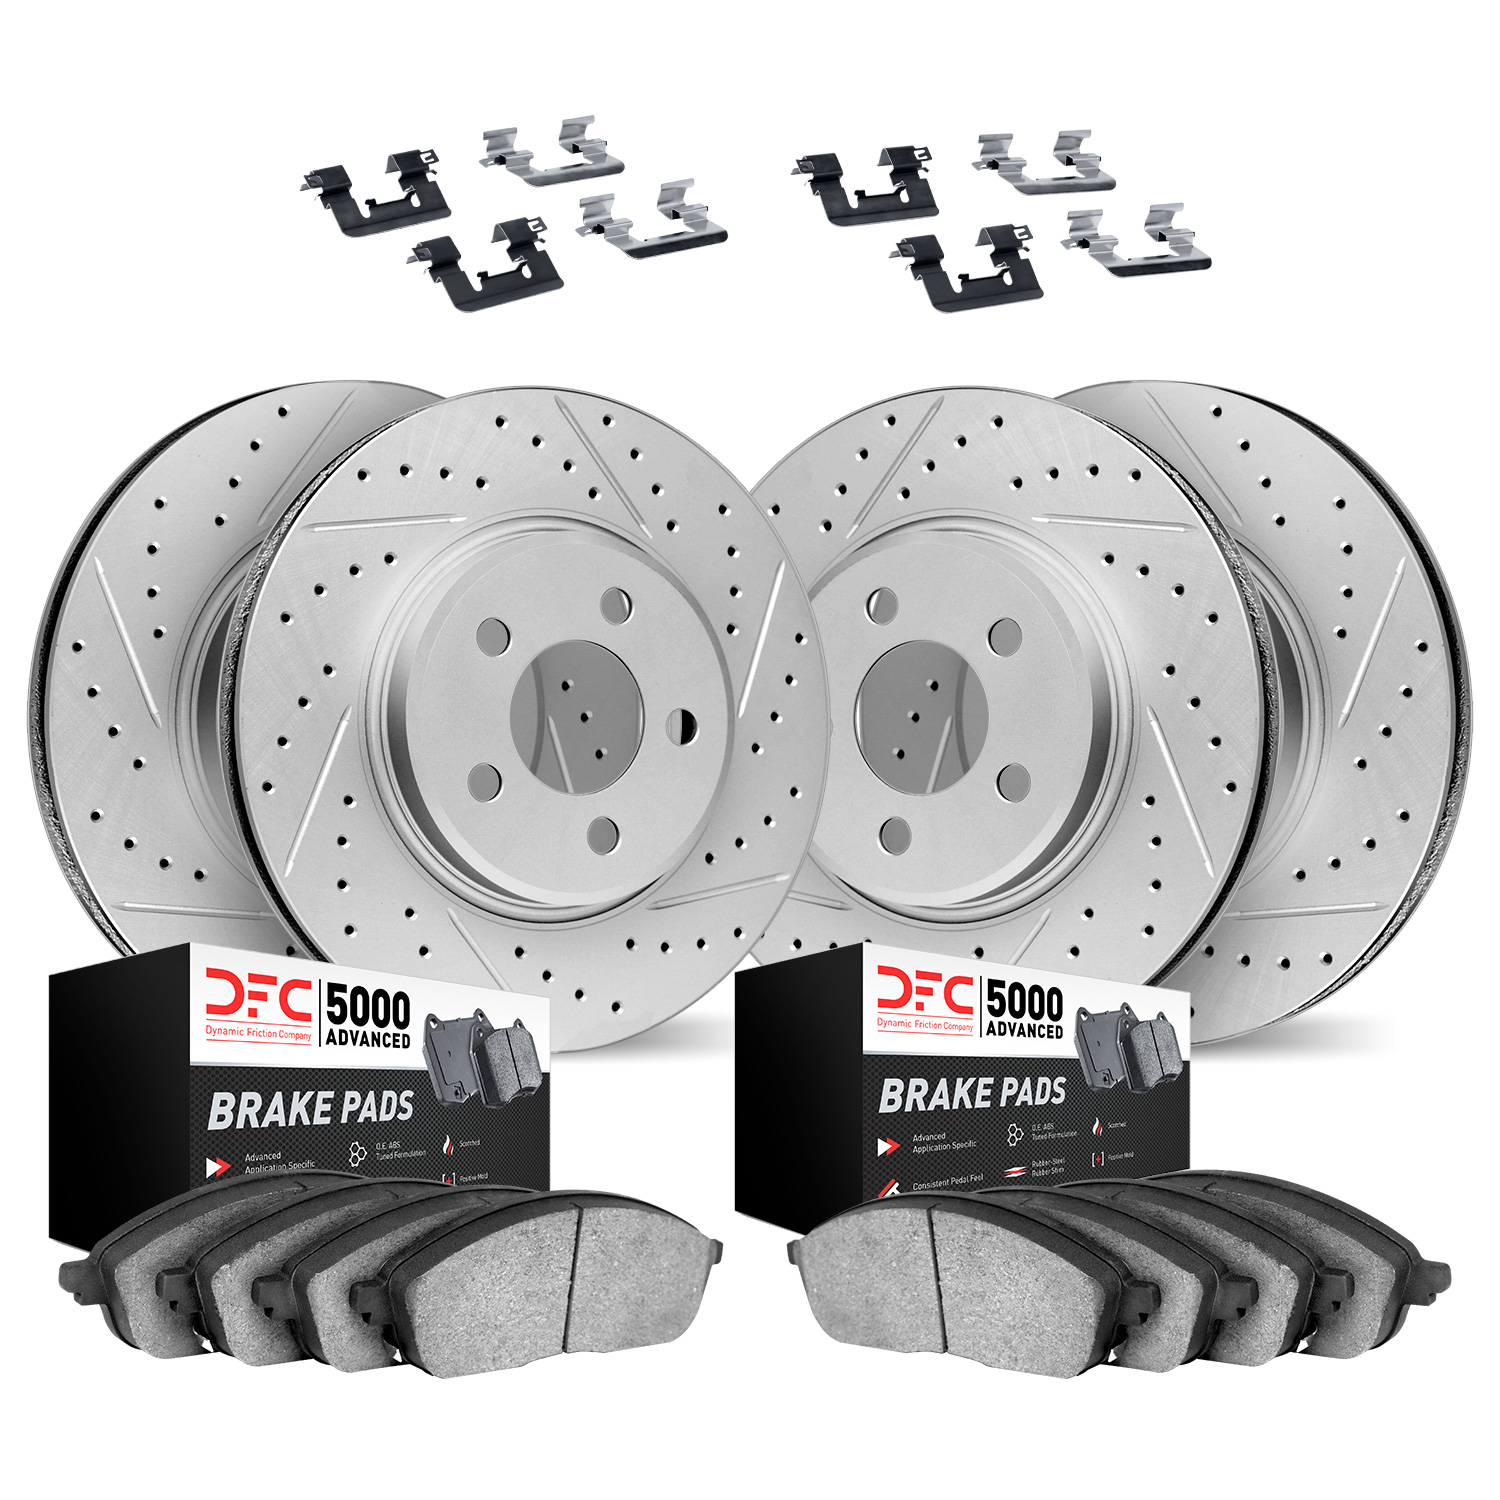 2514-13016 Geoperformance Drilled/Slotted Rotors w/5000 Advanced Brake Pads Kit & Hardware, Fits Select Subaru, Position: Front